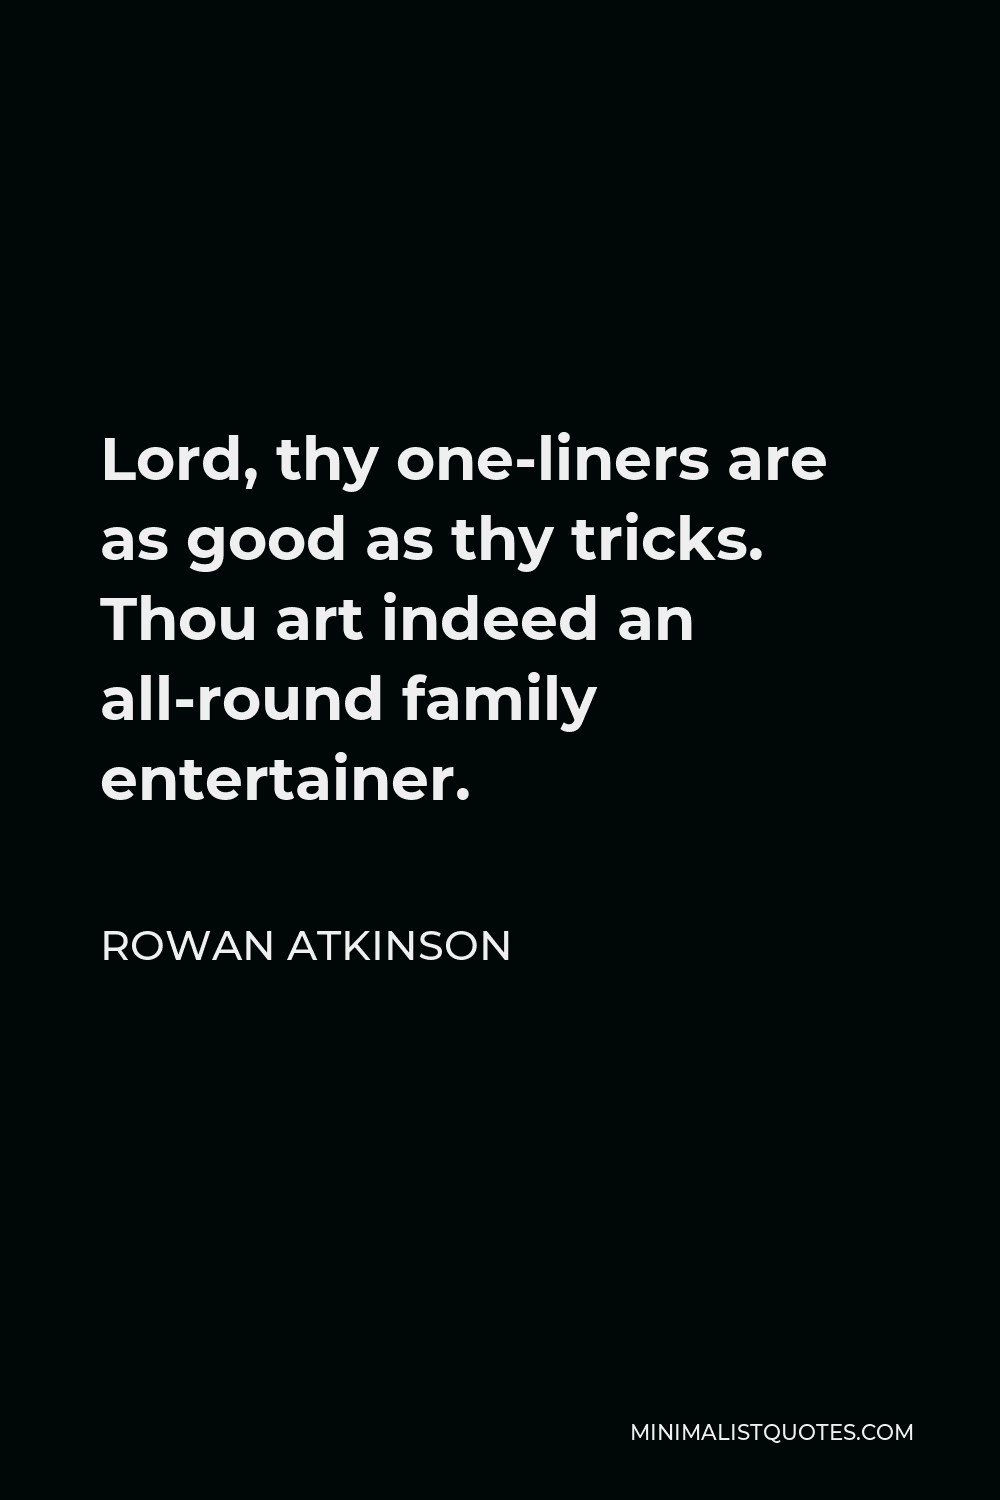 Rowan Atkinson Quote Lord Thy One Liners Are As Good As Thy Tricks Thou Art Indeed An All Round Family Entertainer